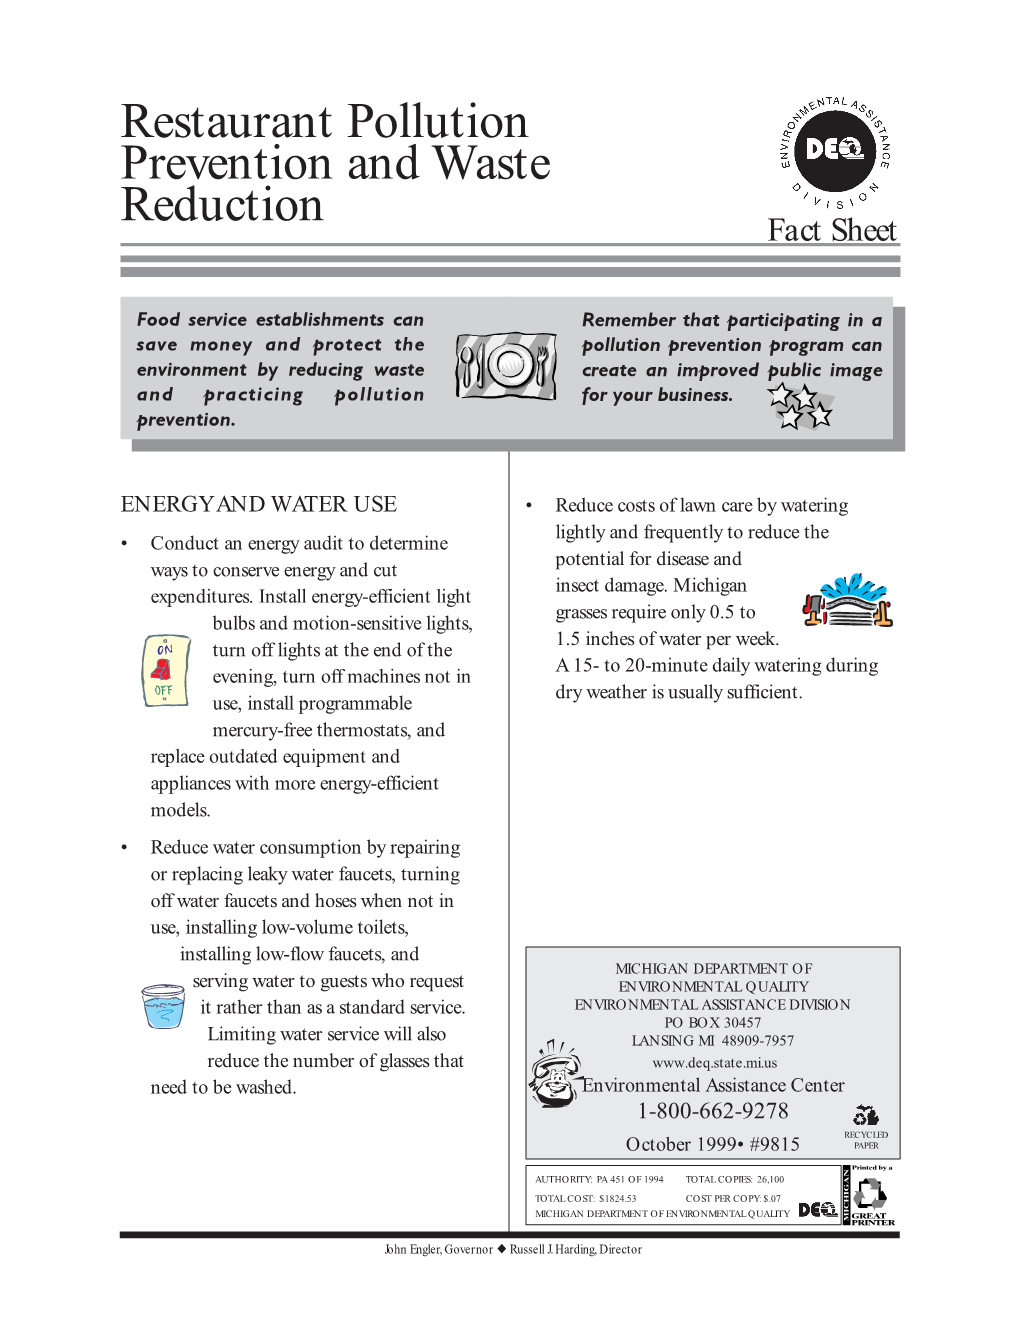 Restaurant Pollution Prevention and Waste Reduction Fact Sheet